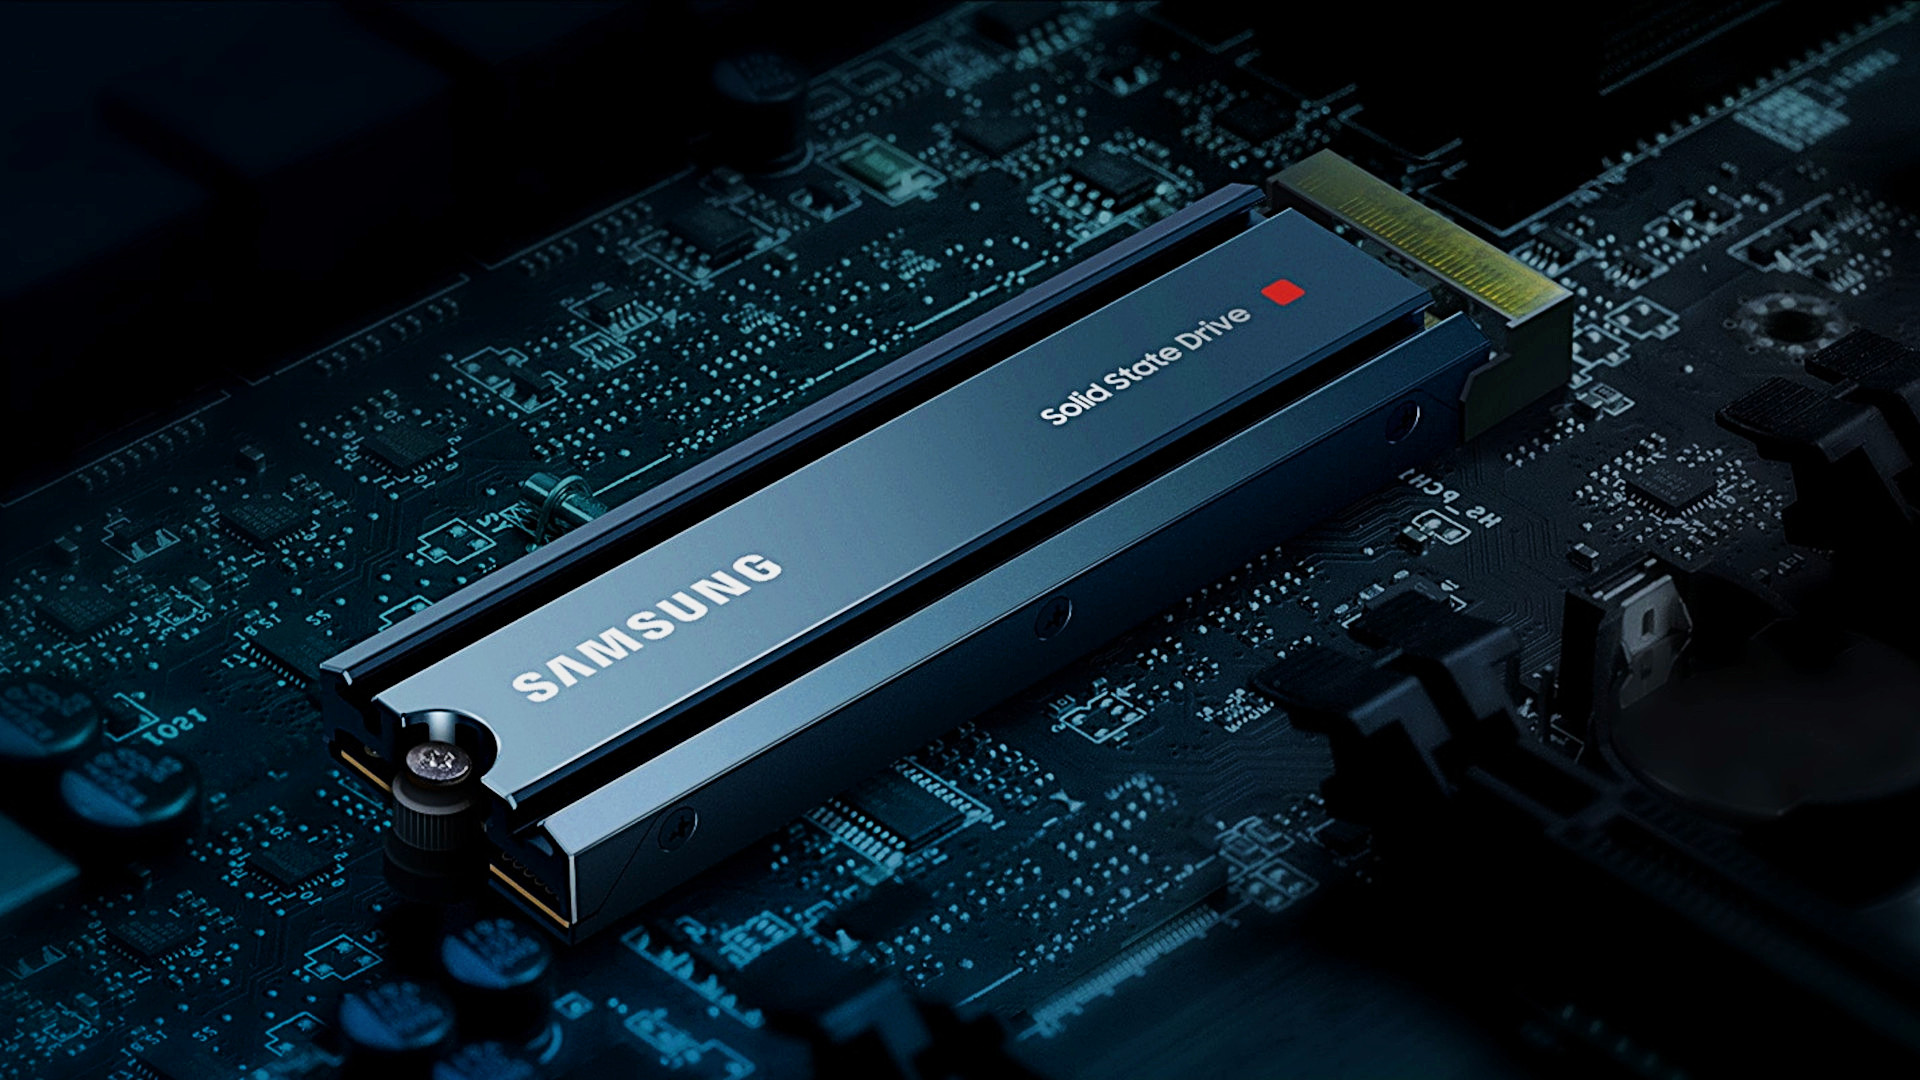 Samsung 990 Pro NVMe PCIe 5.0 SSD is officially in the works